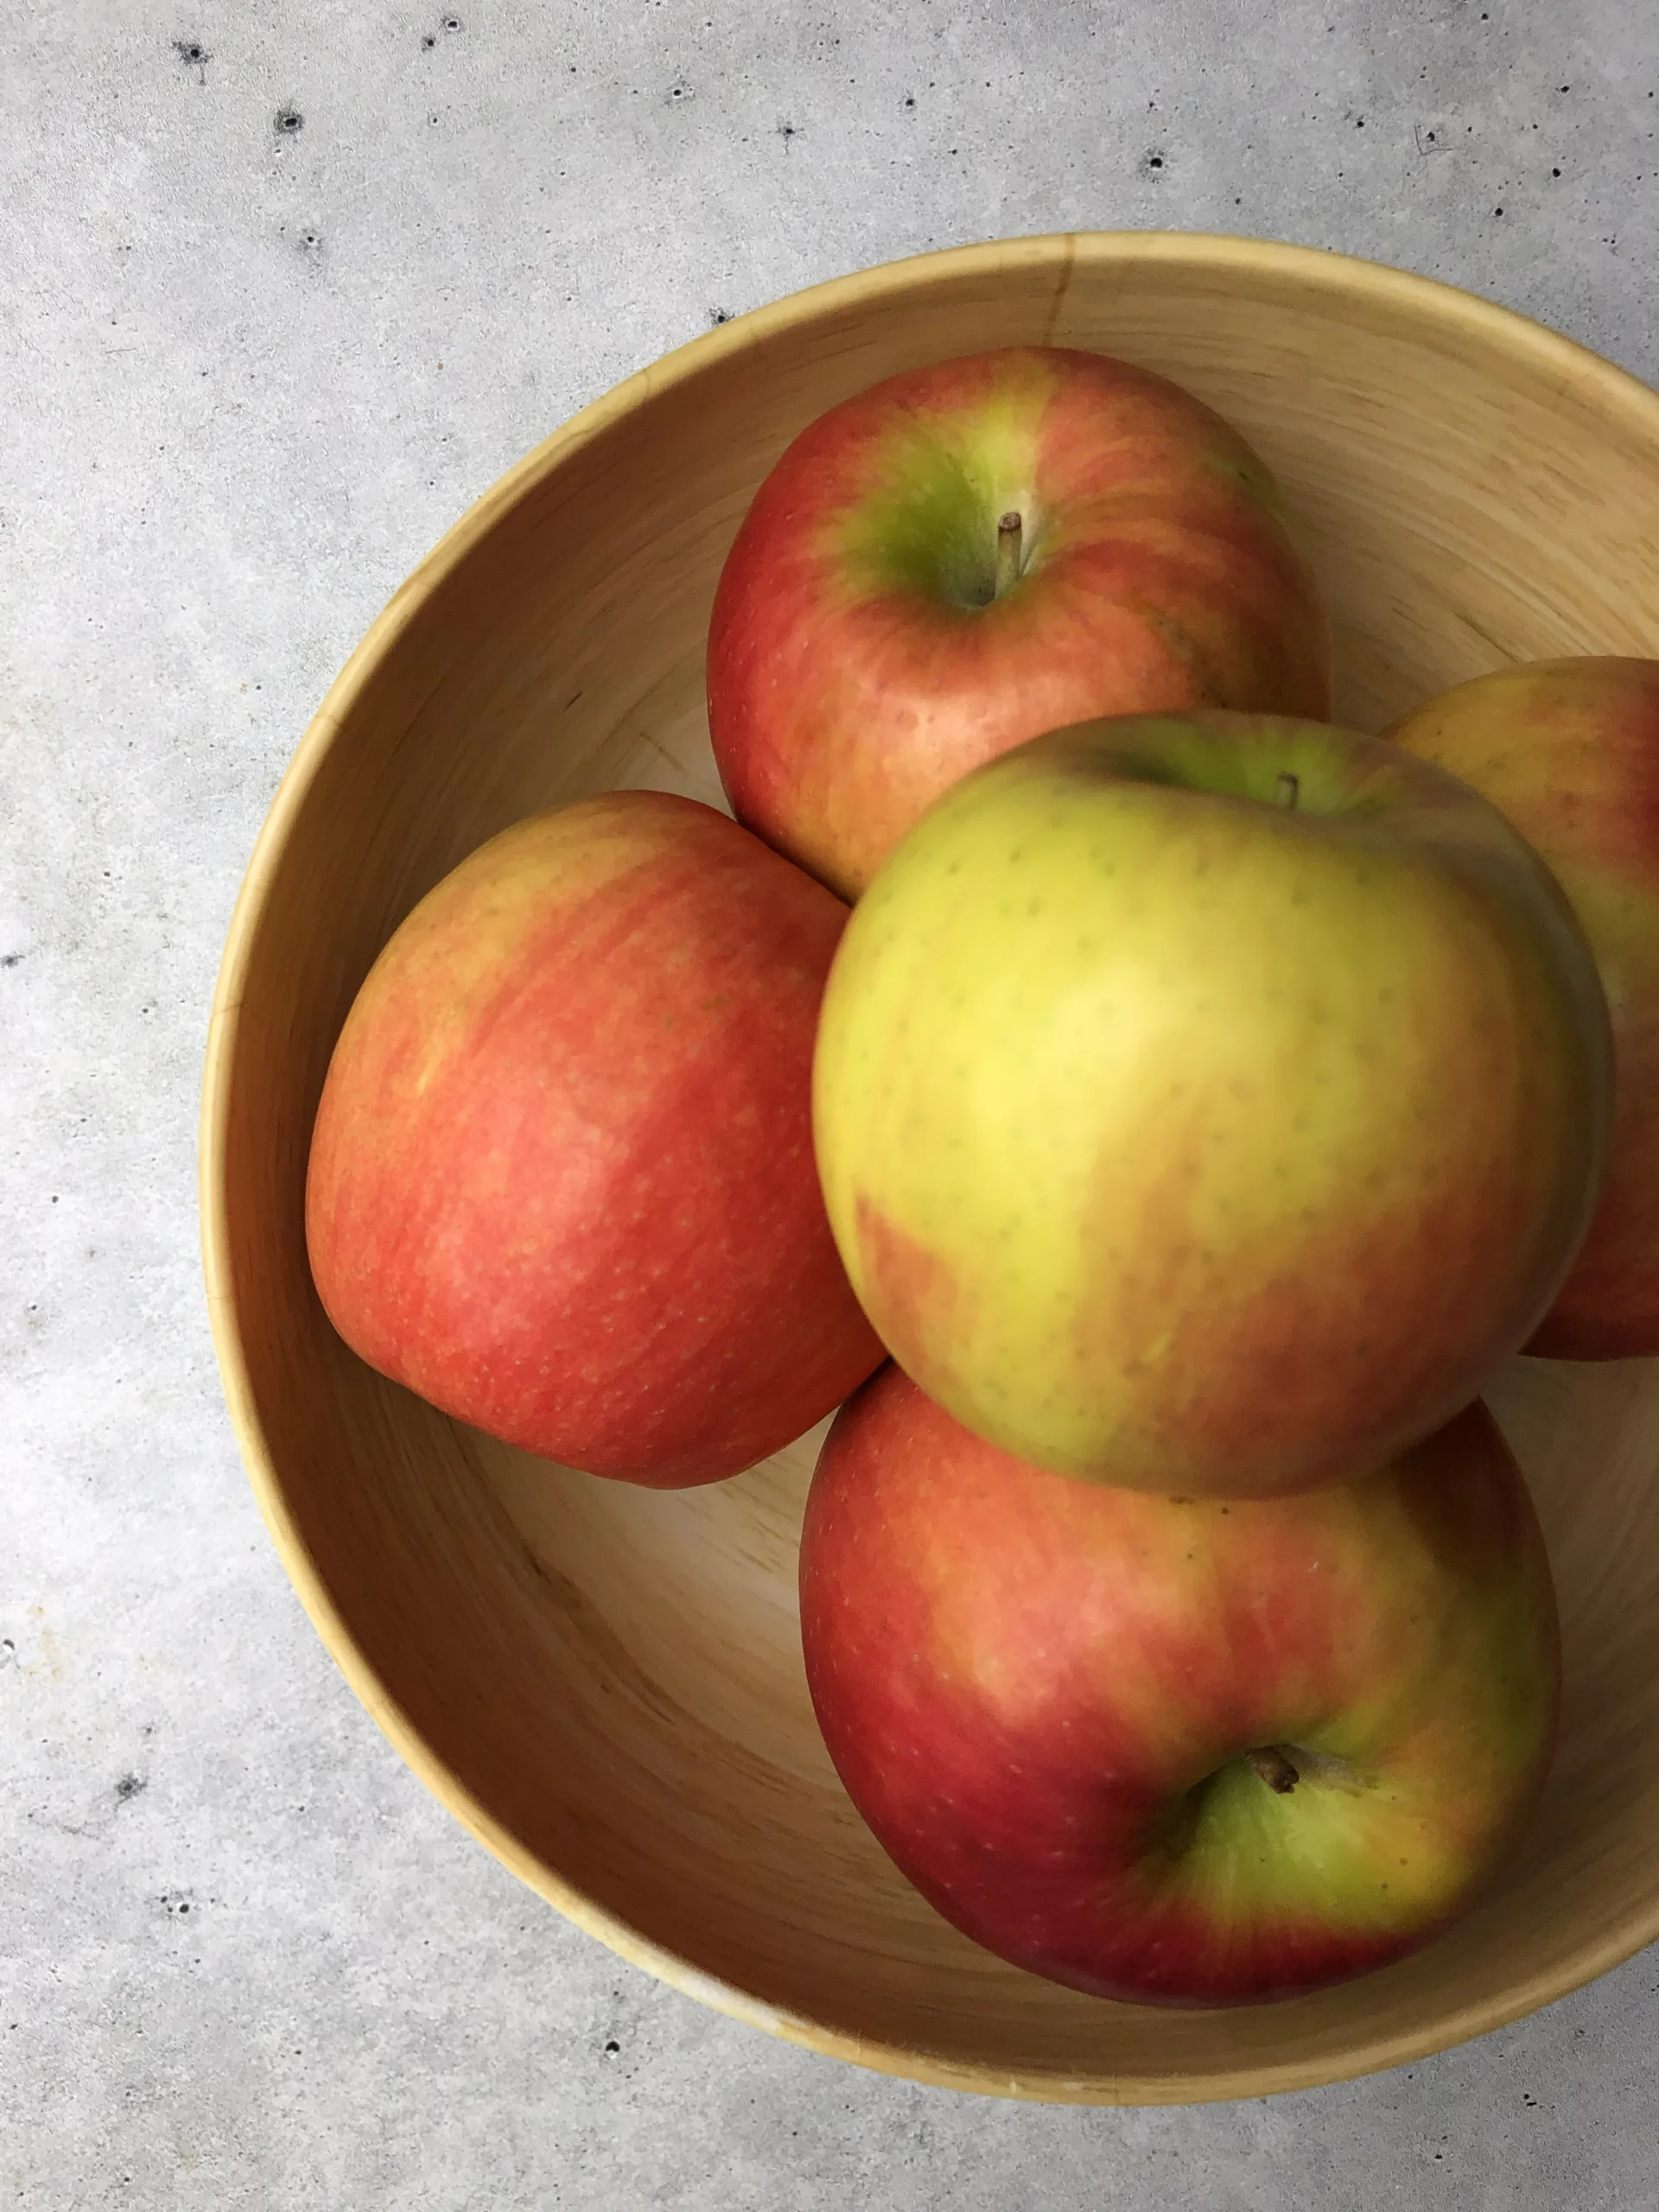 pink lady apples in a bowl